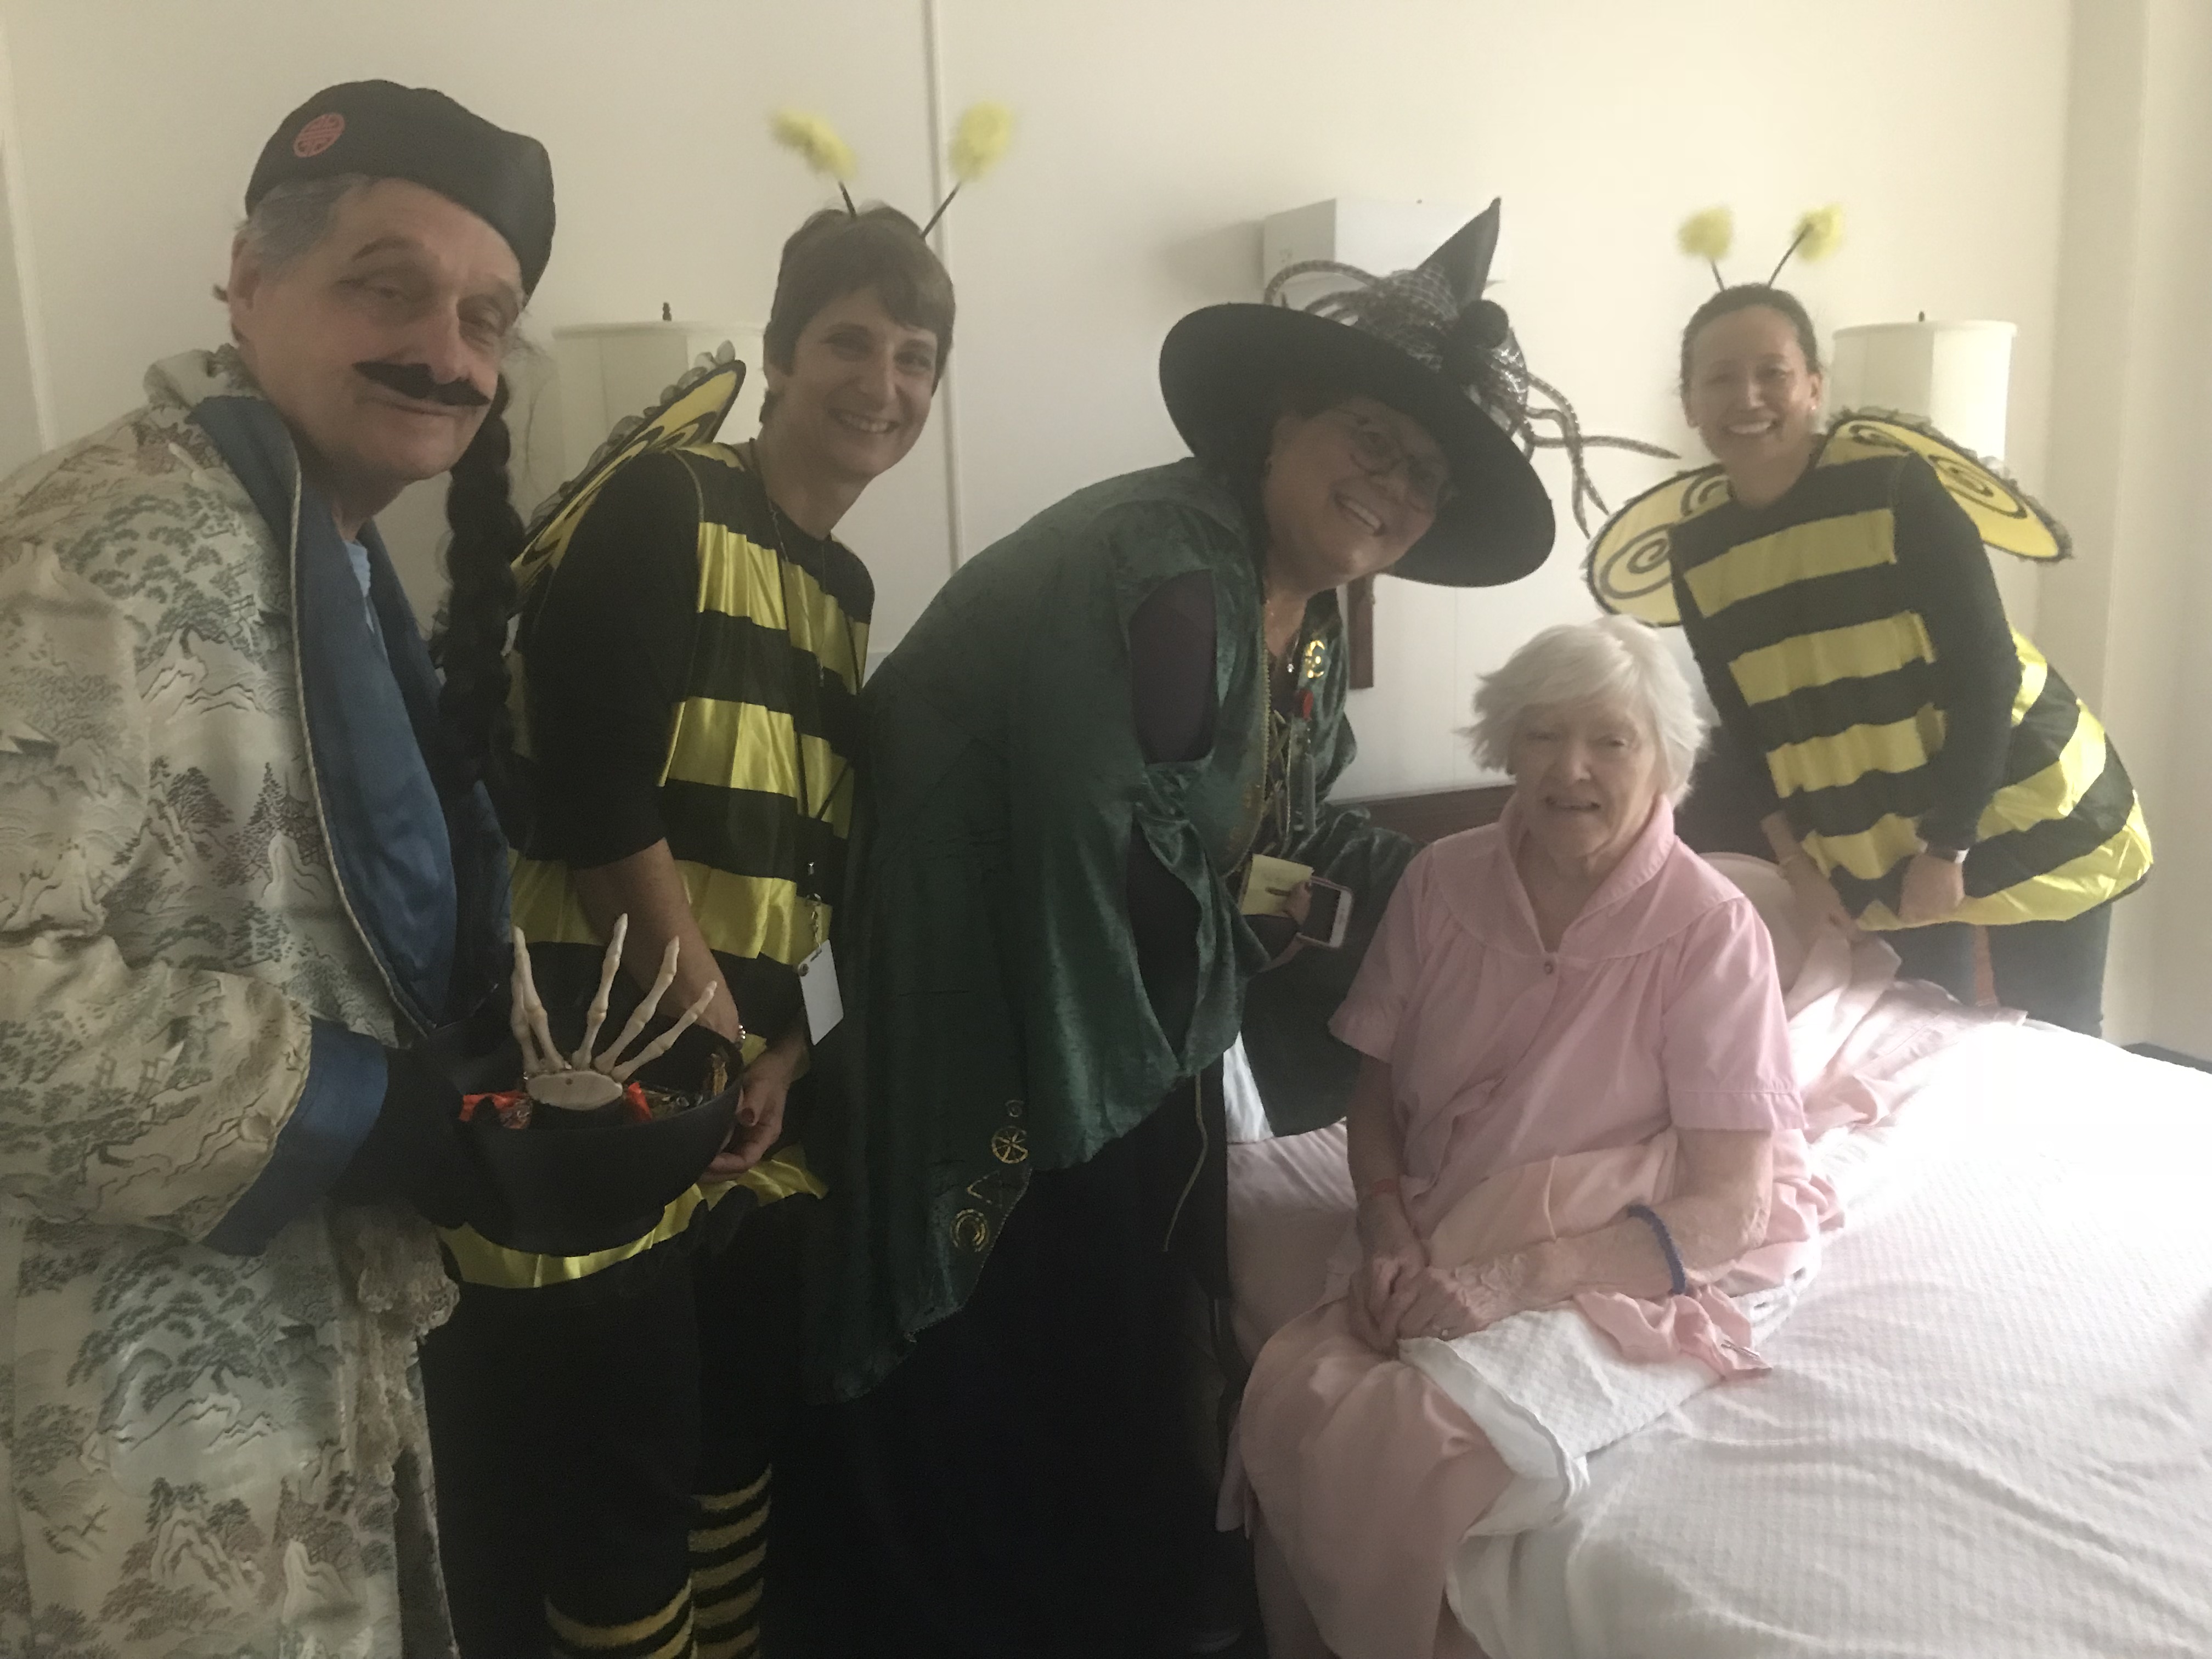 Surpising a resident in bed on Halloween!